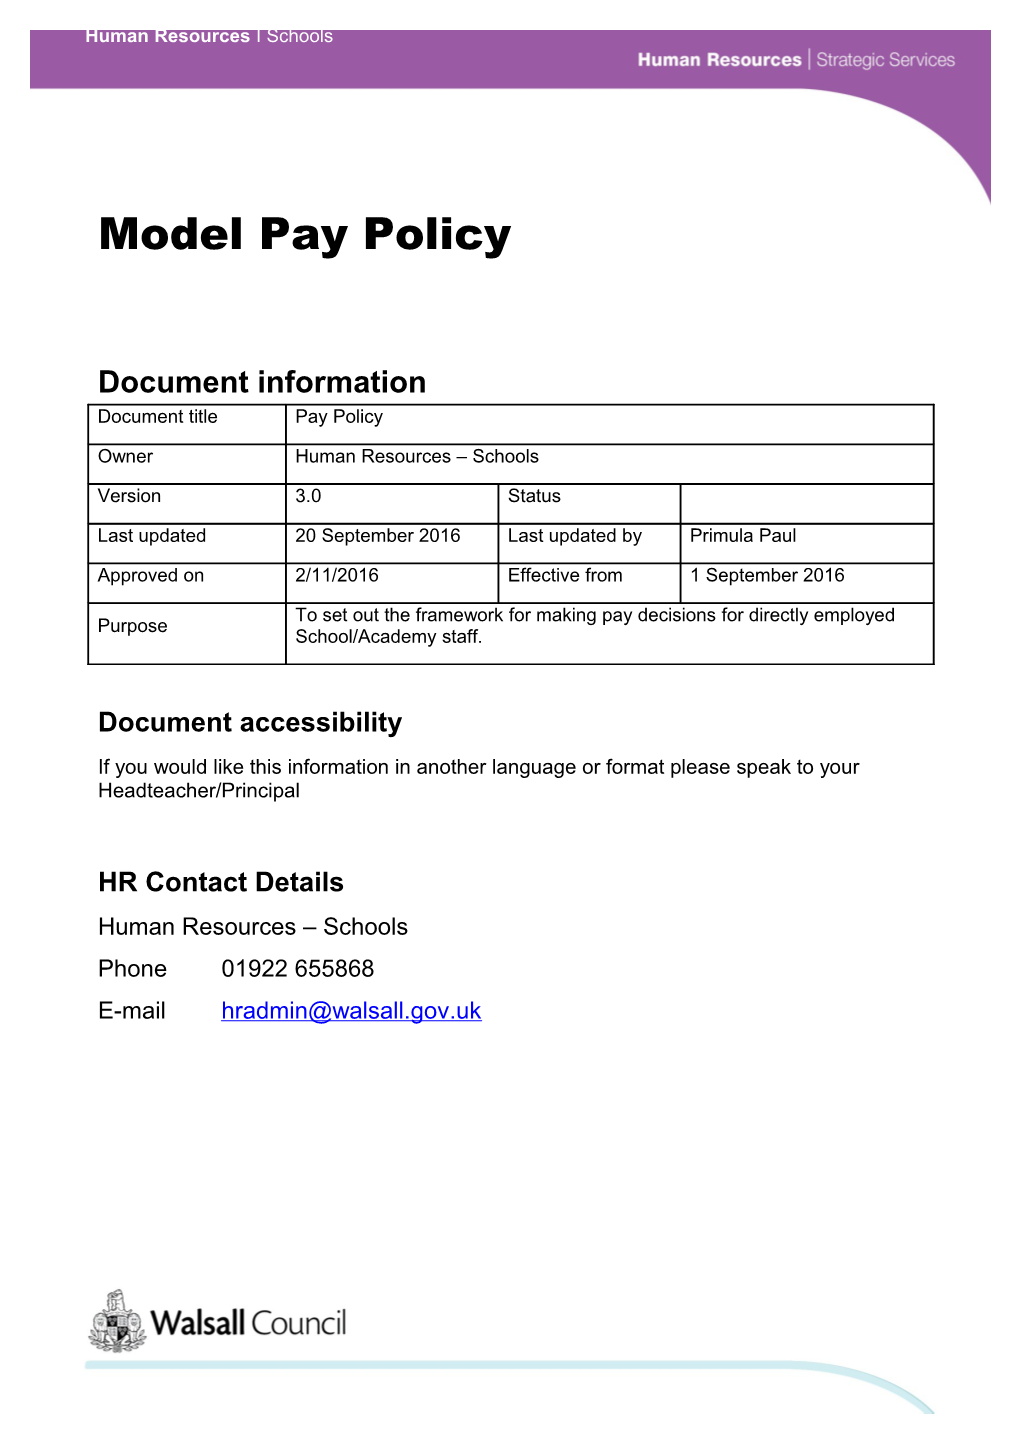 Model Pay Policy for Maintained Schools in England